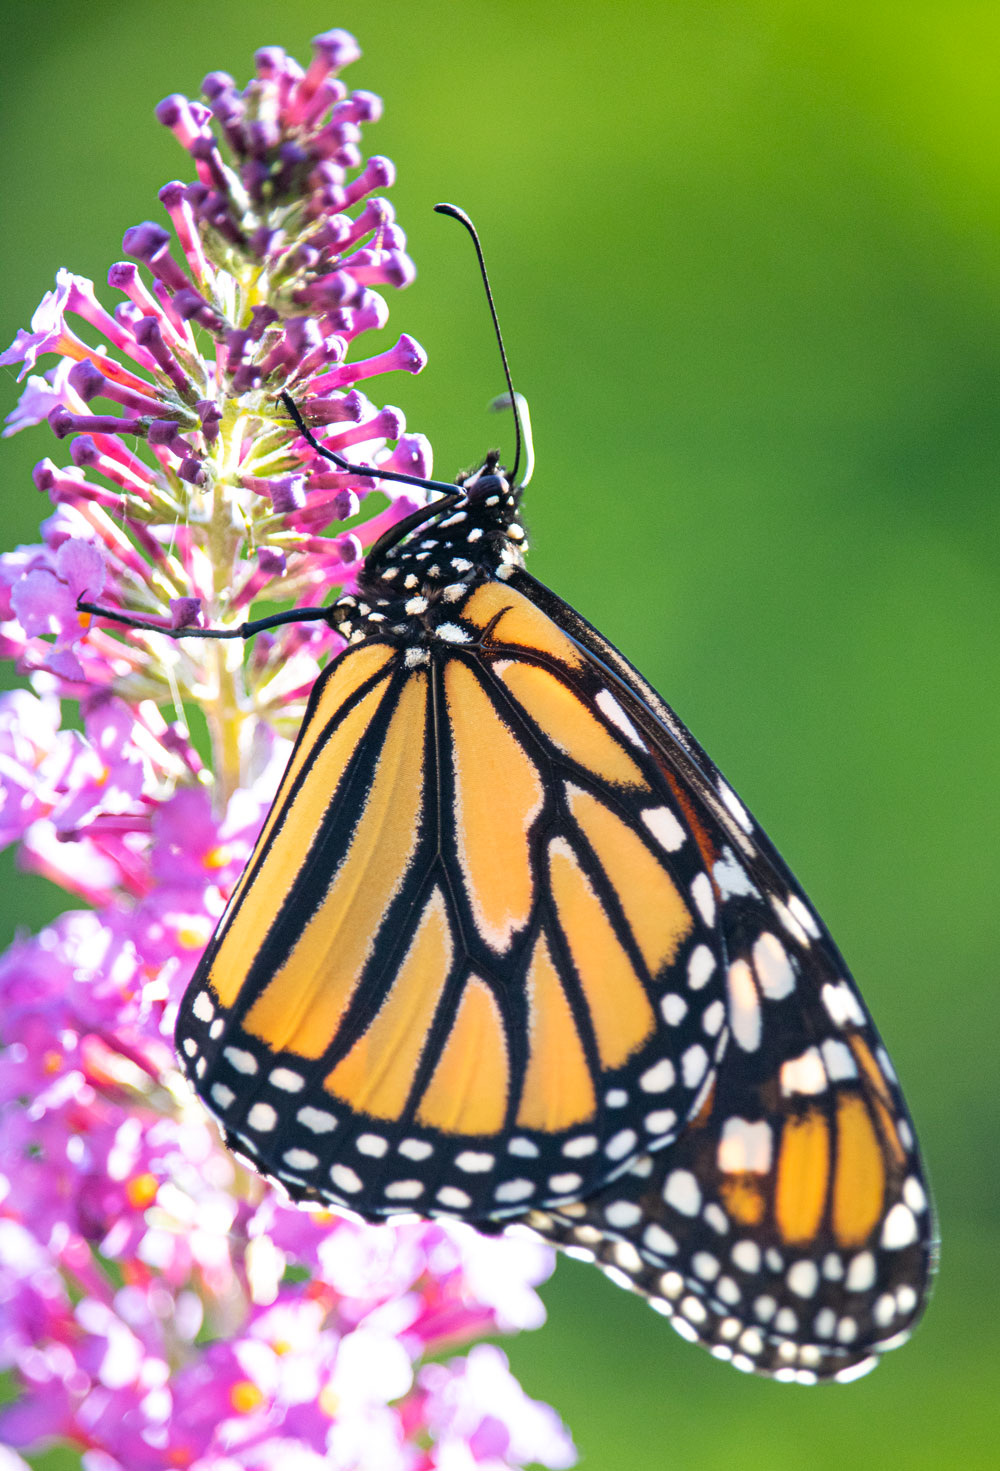 Monarch Butterflies Emerge: A Closer Look into a Magnificent Life Cycle